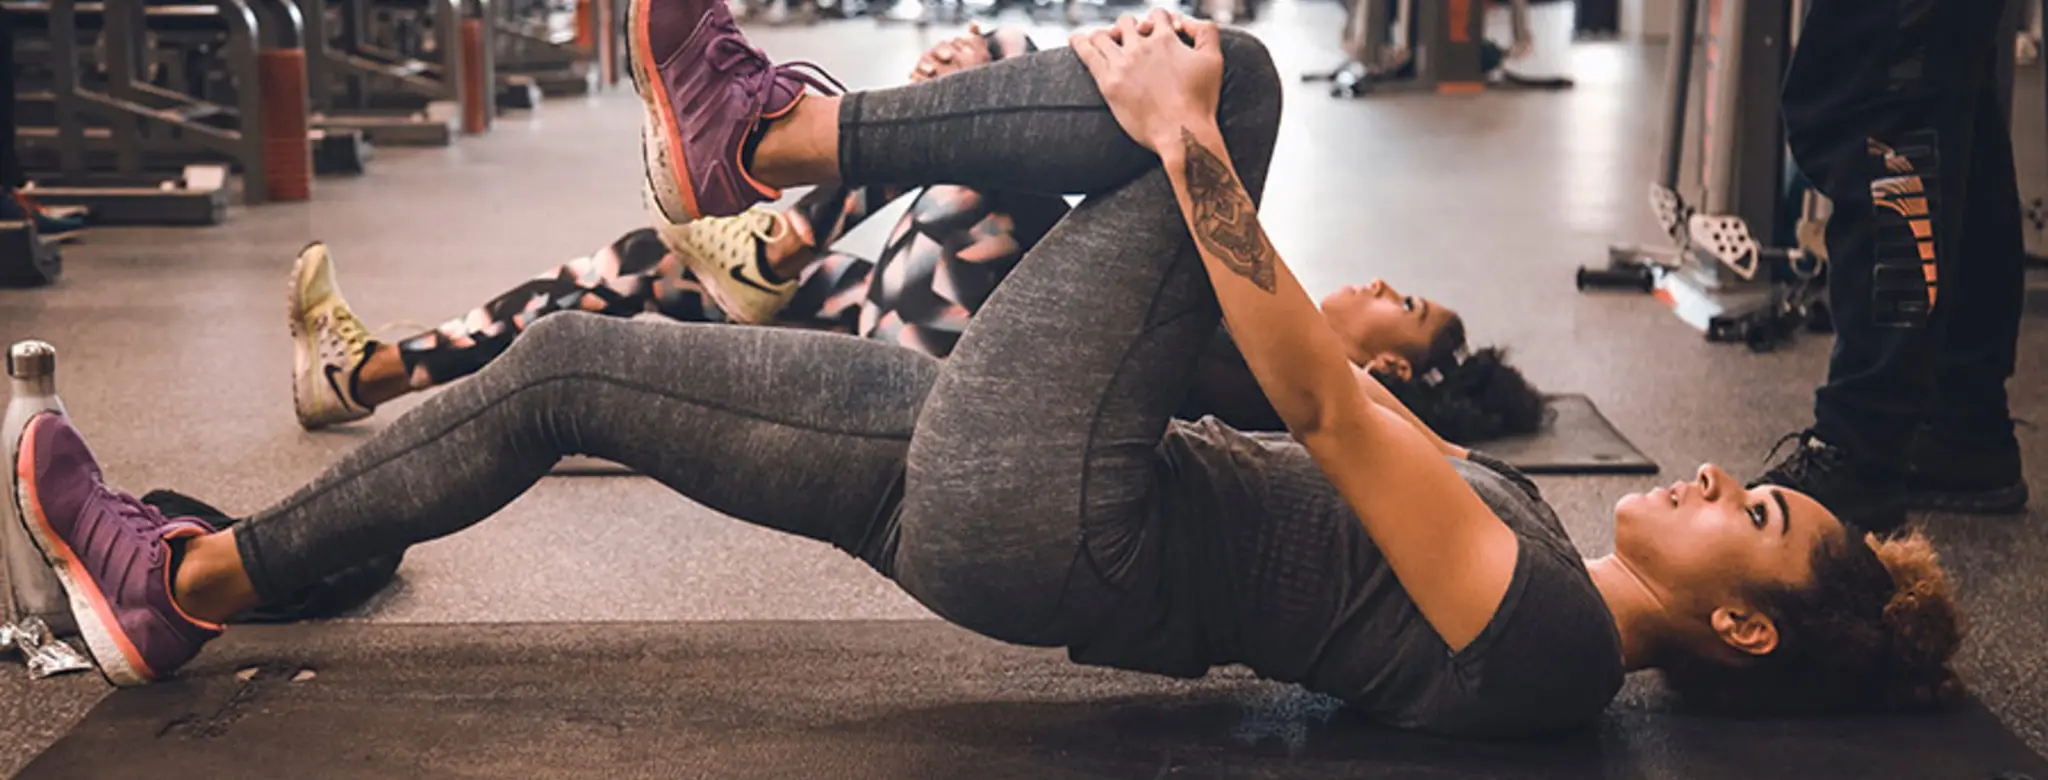 Two women exercising at a fitness studio with a trainer